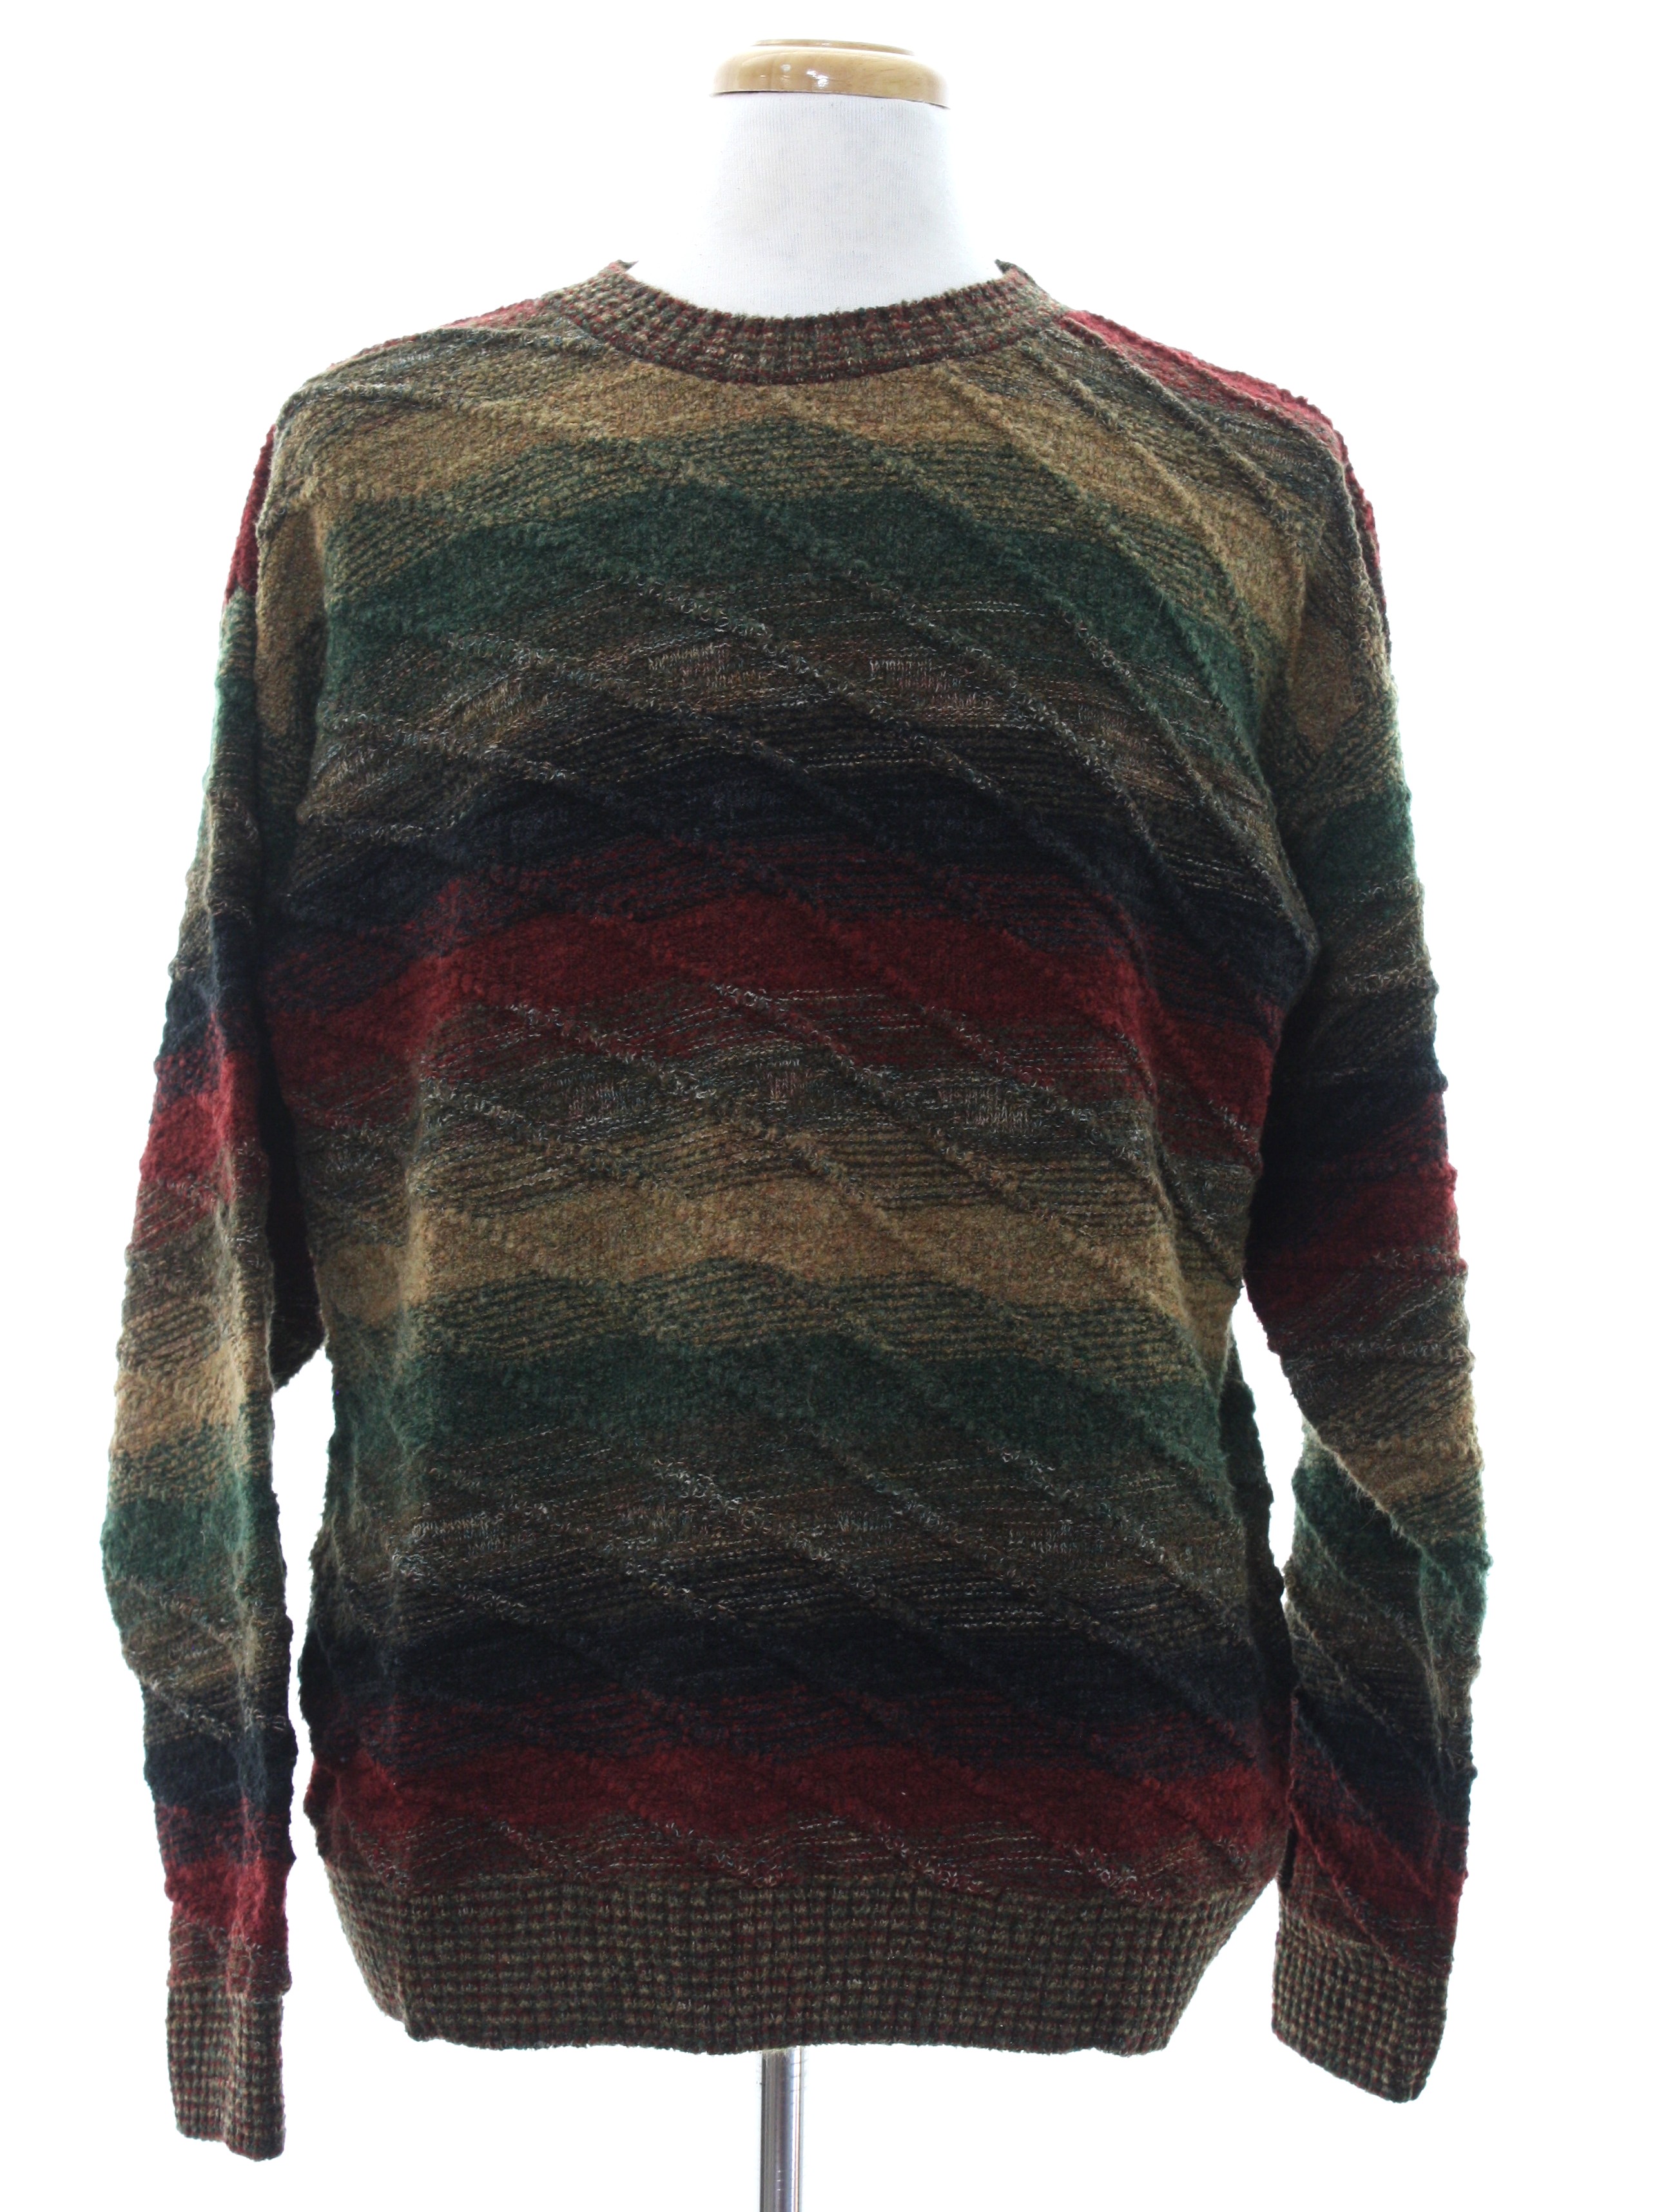 Eighties Vintage Sweater: 80s style -Protege Collection- Mens heather ...